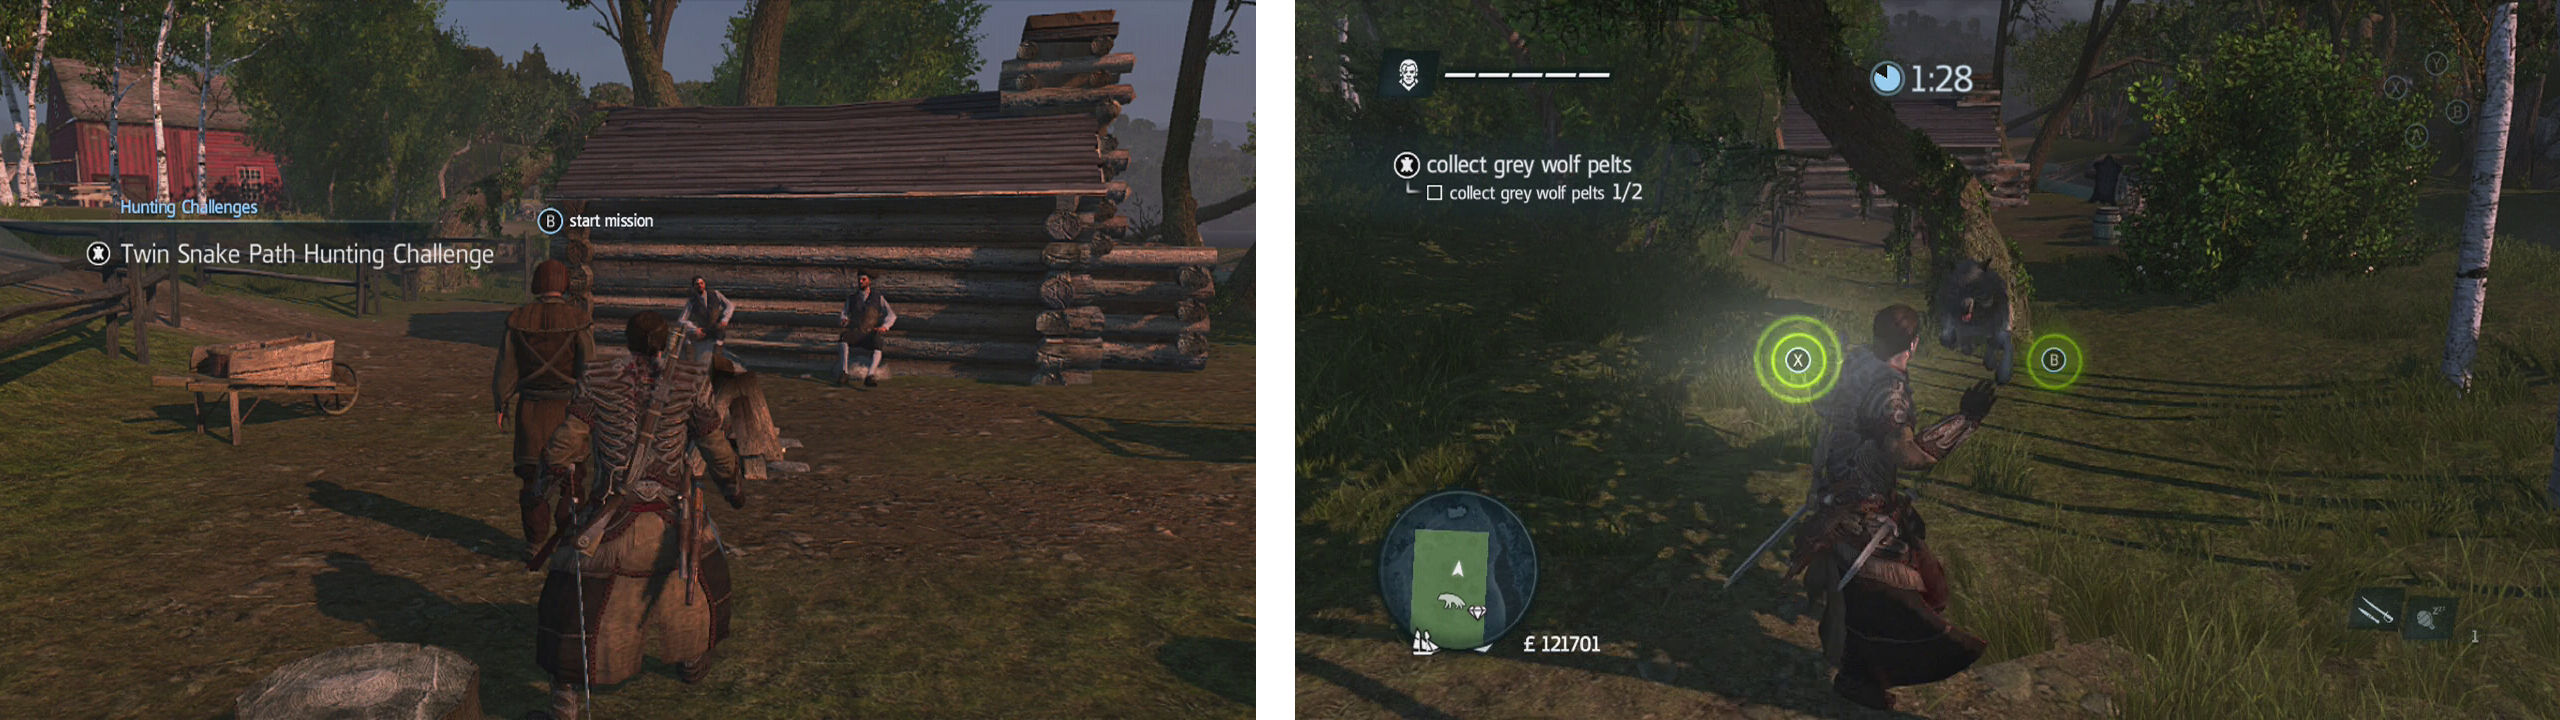 Approach the hunter to start the challenge (left). Approach wolves to have them attack you, press the buttons in sequence to kill them (right).